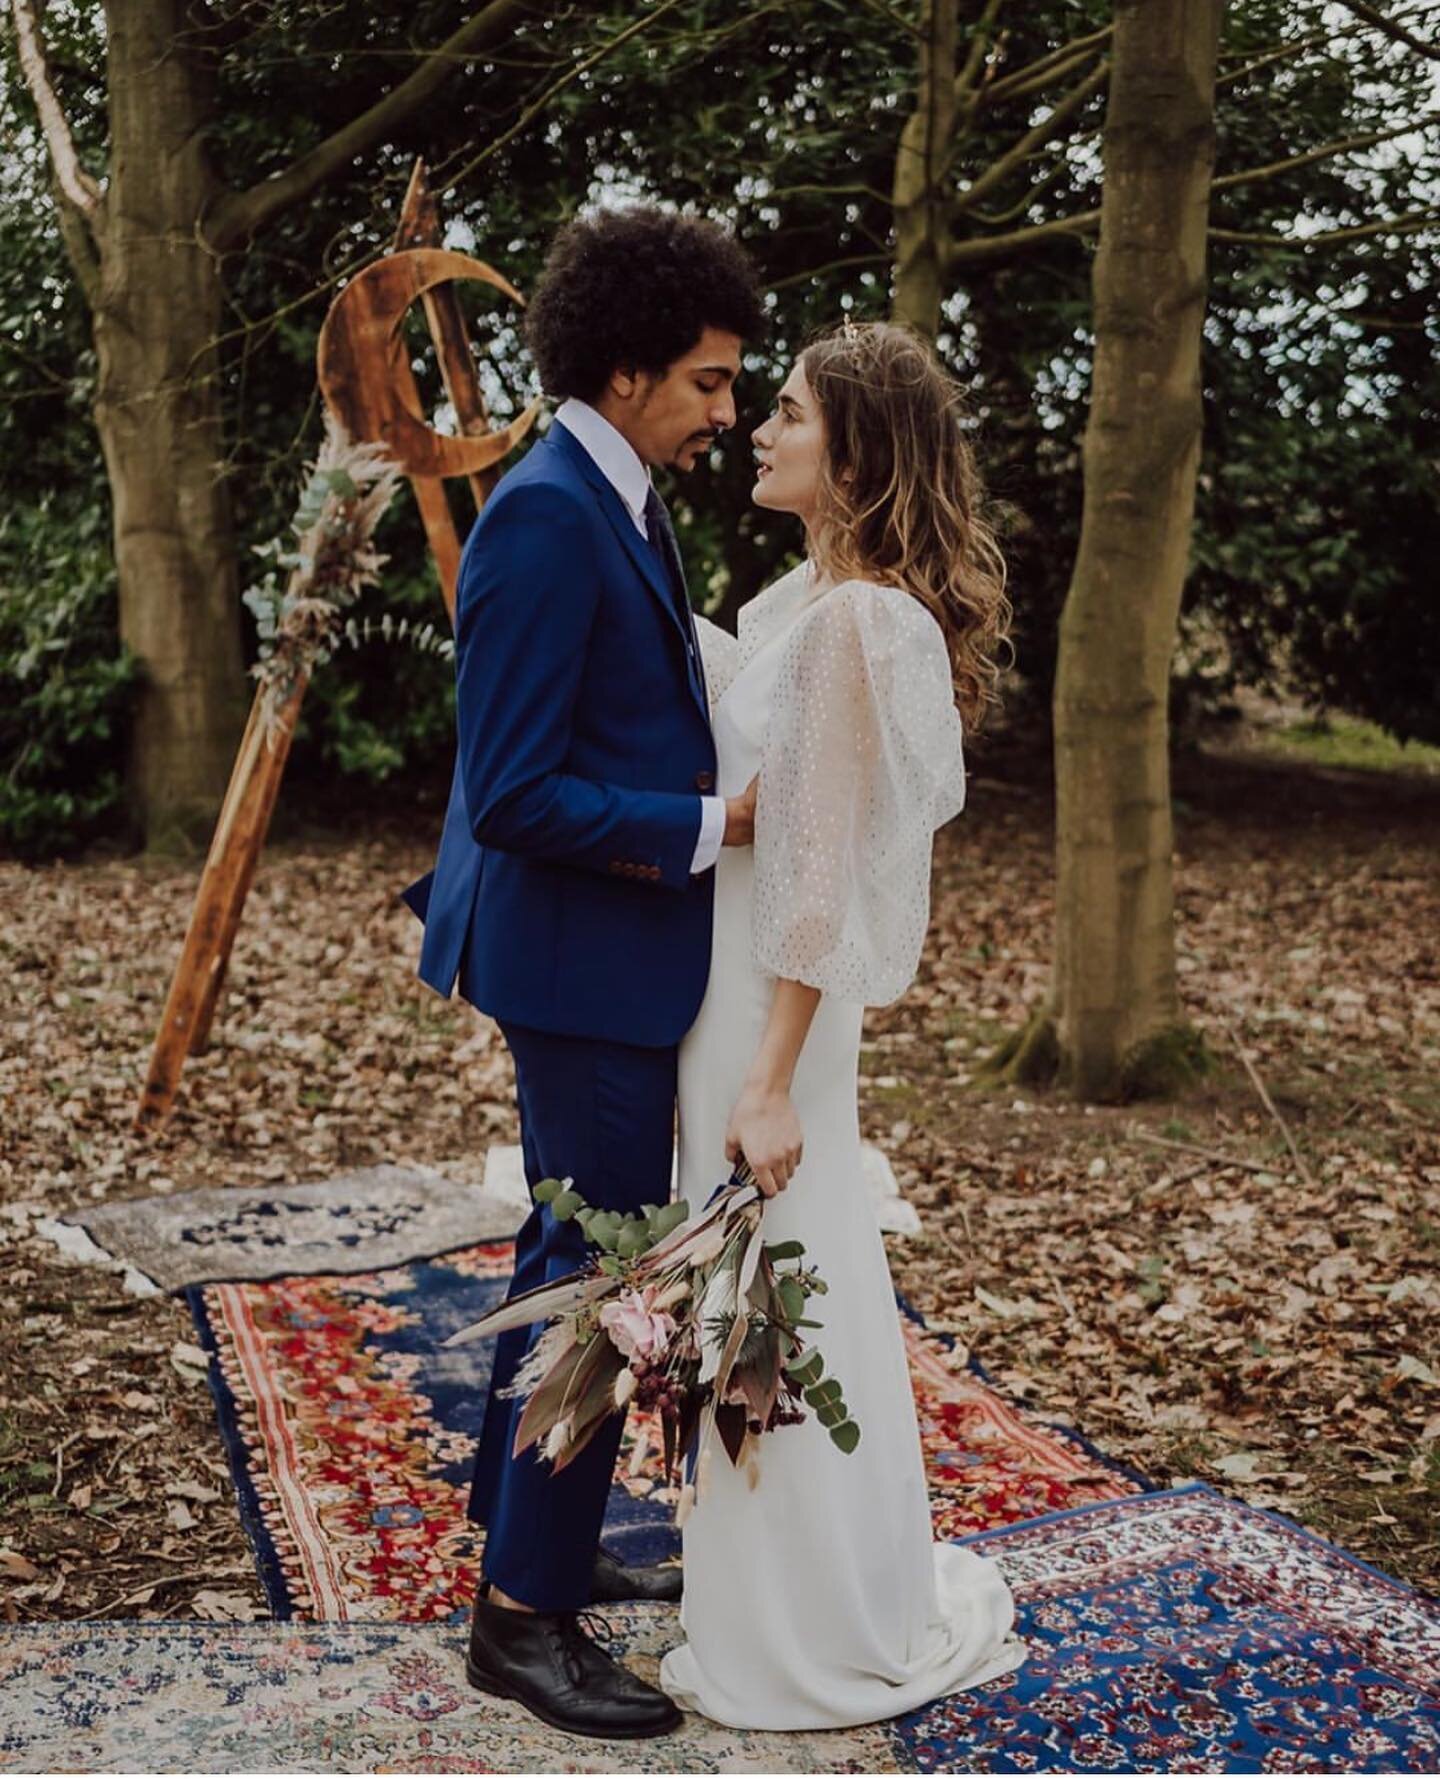 We are super chuffed to be over on @whimsicalwonderlandweddings again today - thanks so much for featuring our family business 🔹Go take a look for all the celestial inspo #Repost @whimsicalwonderlandweddings with @get_repost
・・・
Do backdrops get any